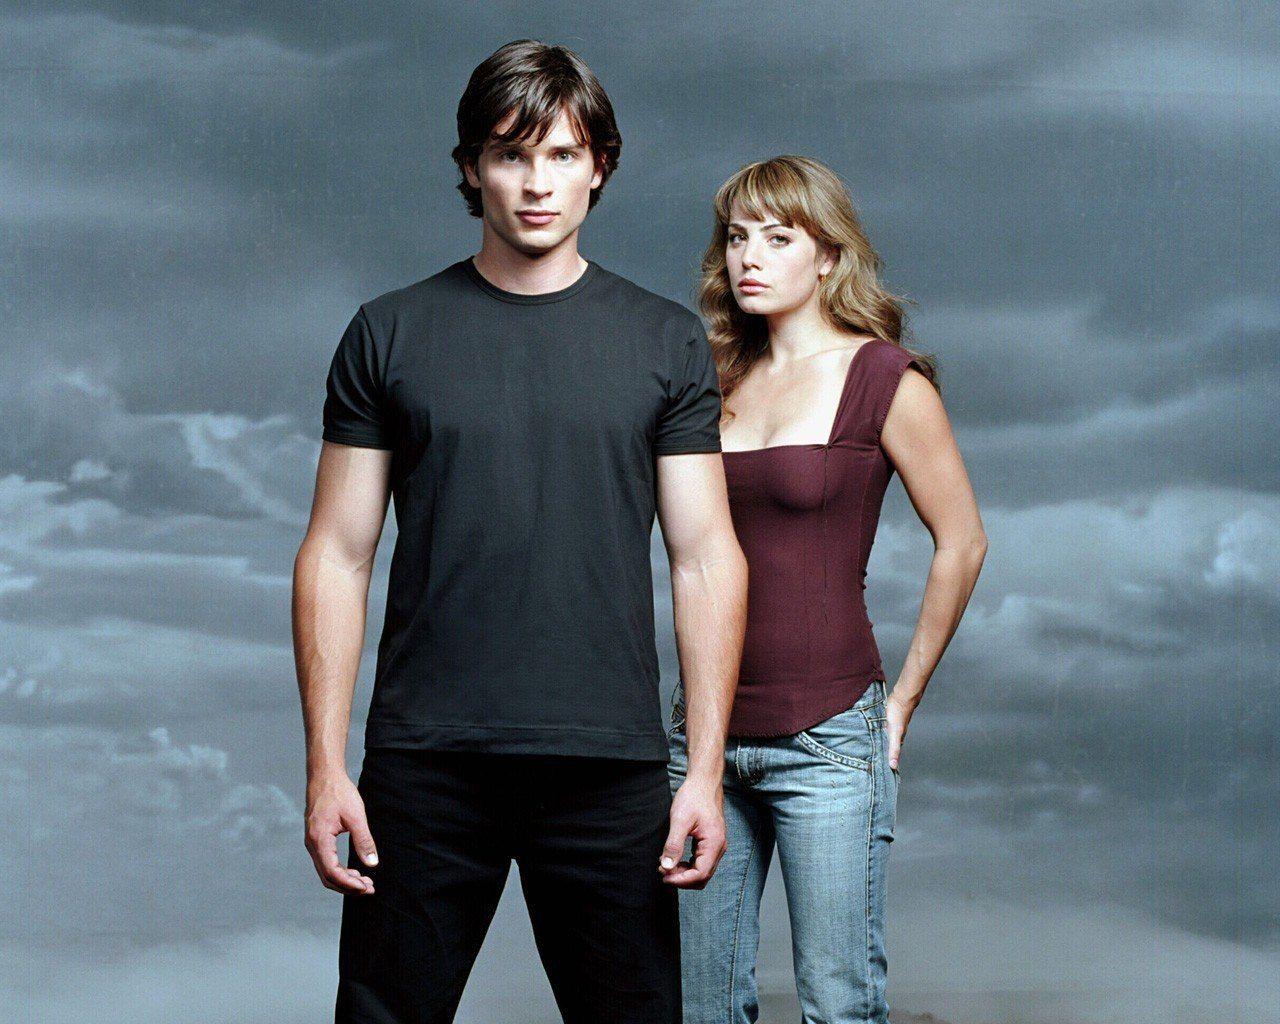 Actors Clark Kent and Erica durance wallpaper and image